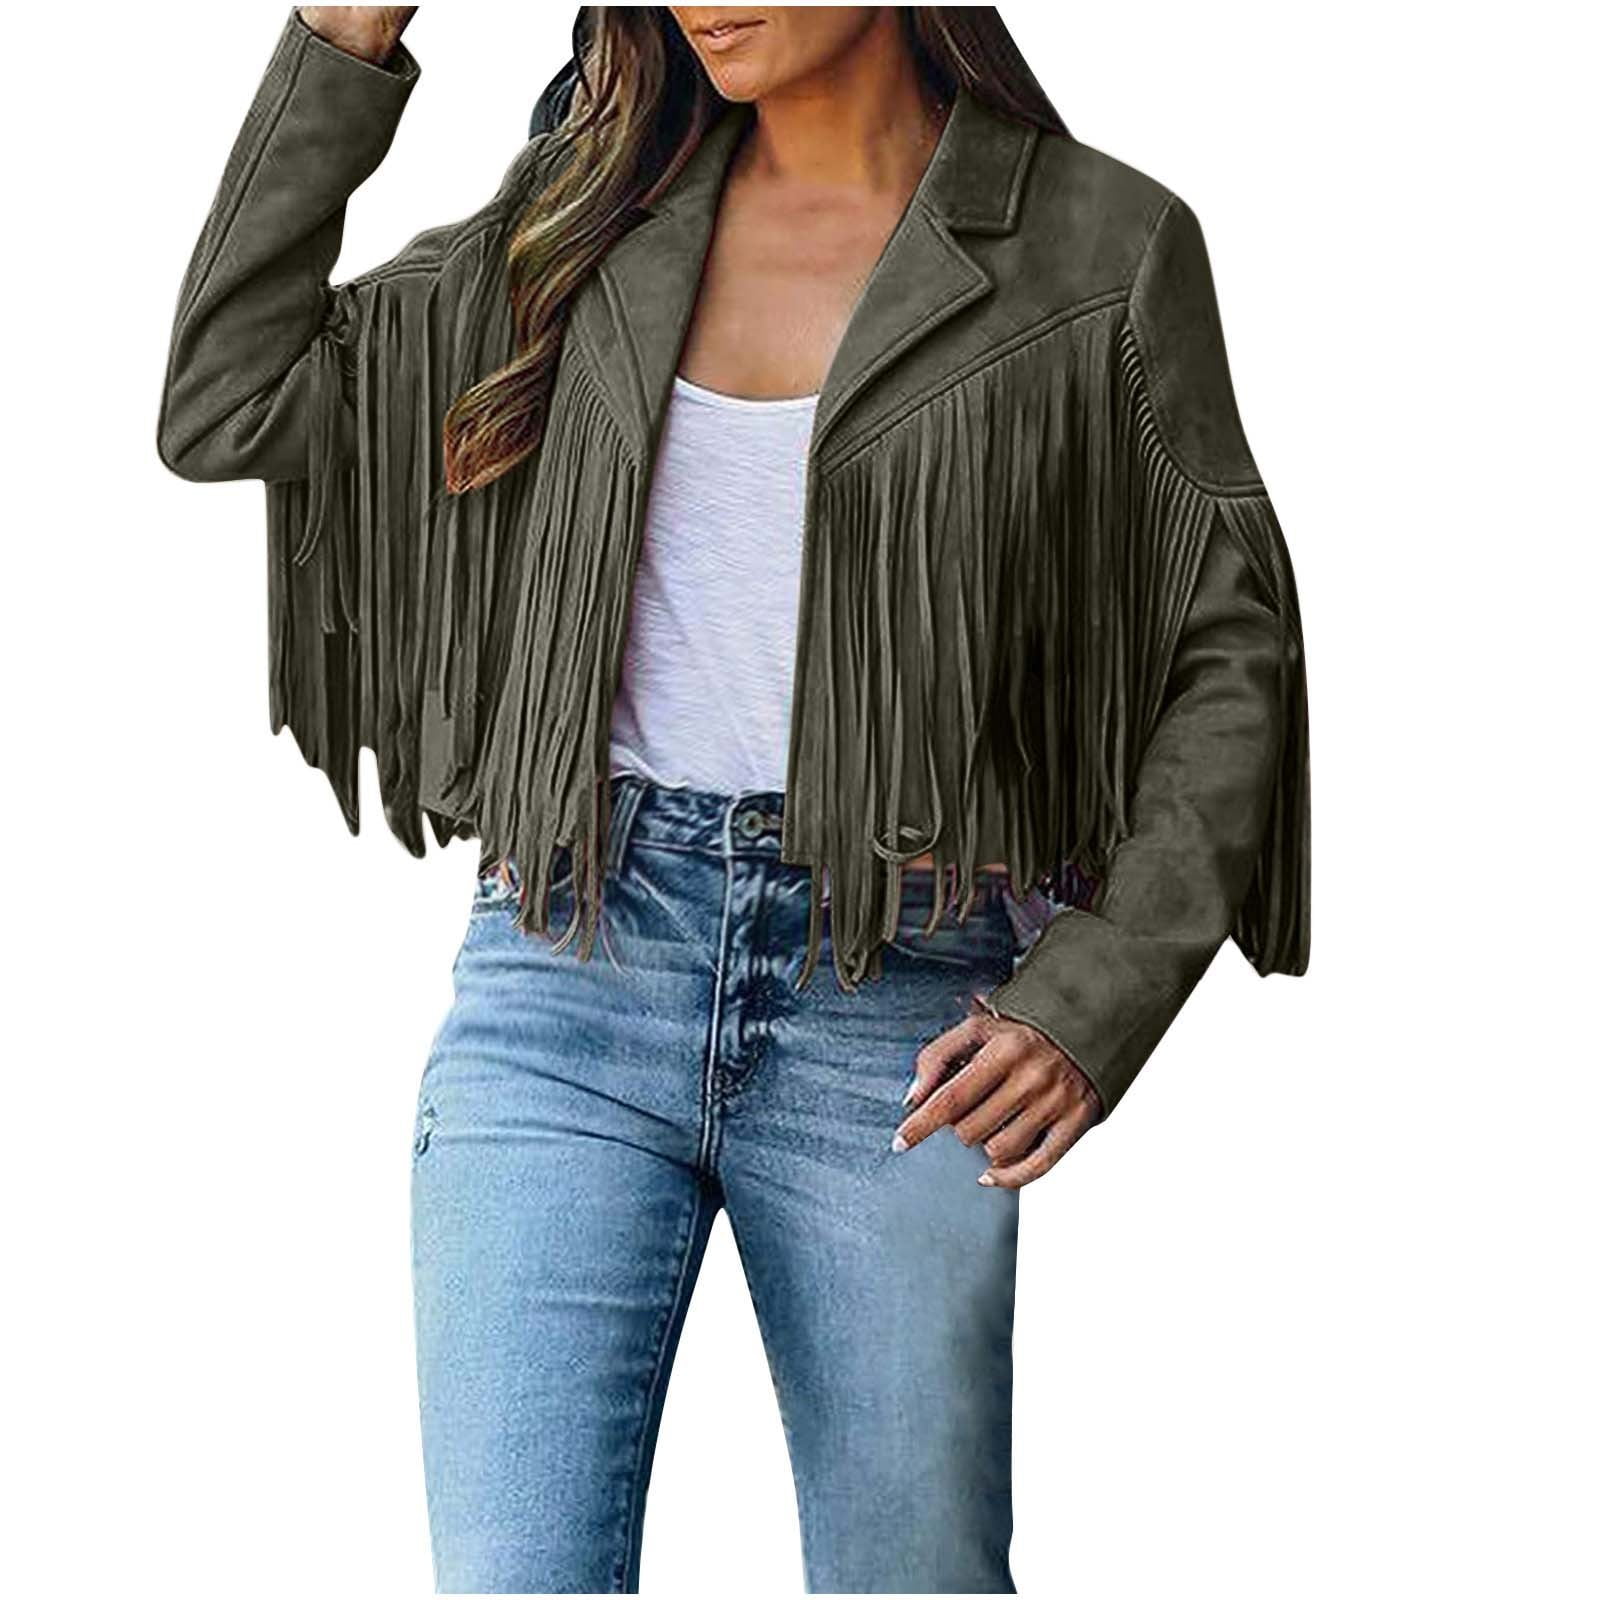 Juebong Fringe Coat Women Cowgirl Outfit Faux Suede Open-Front Vintage ...